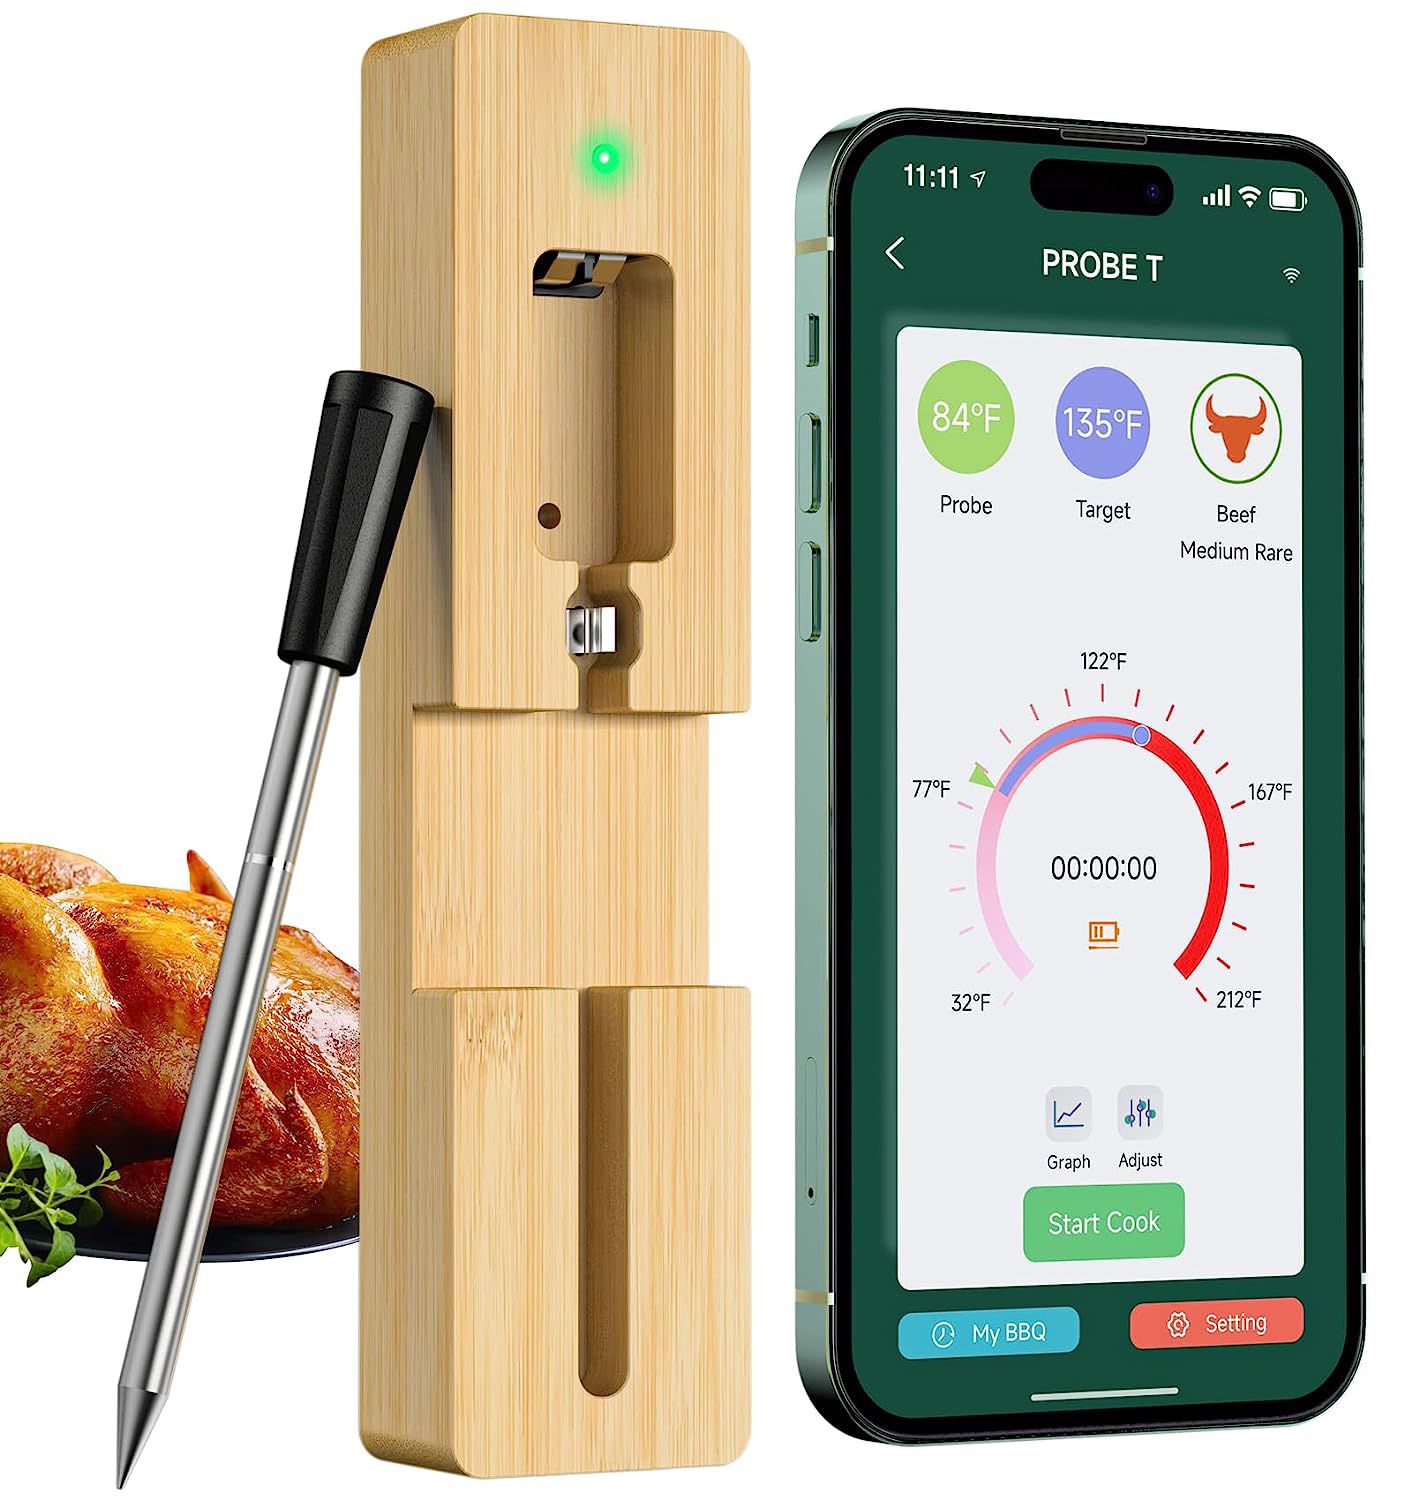 New MEATER+165ft Long Range Smart Wireless Meat Thermometer for